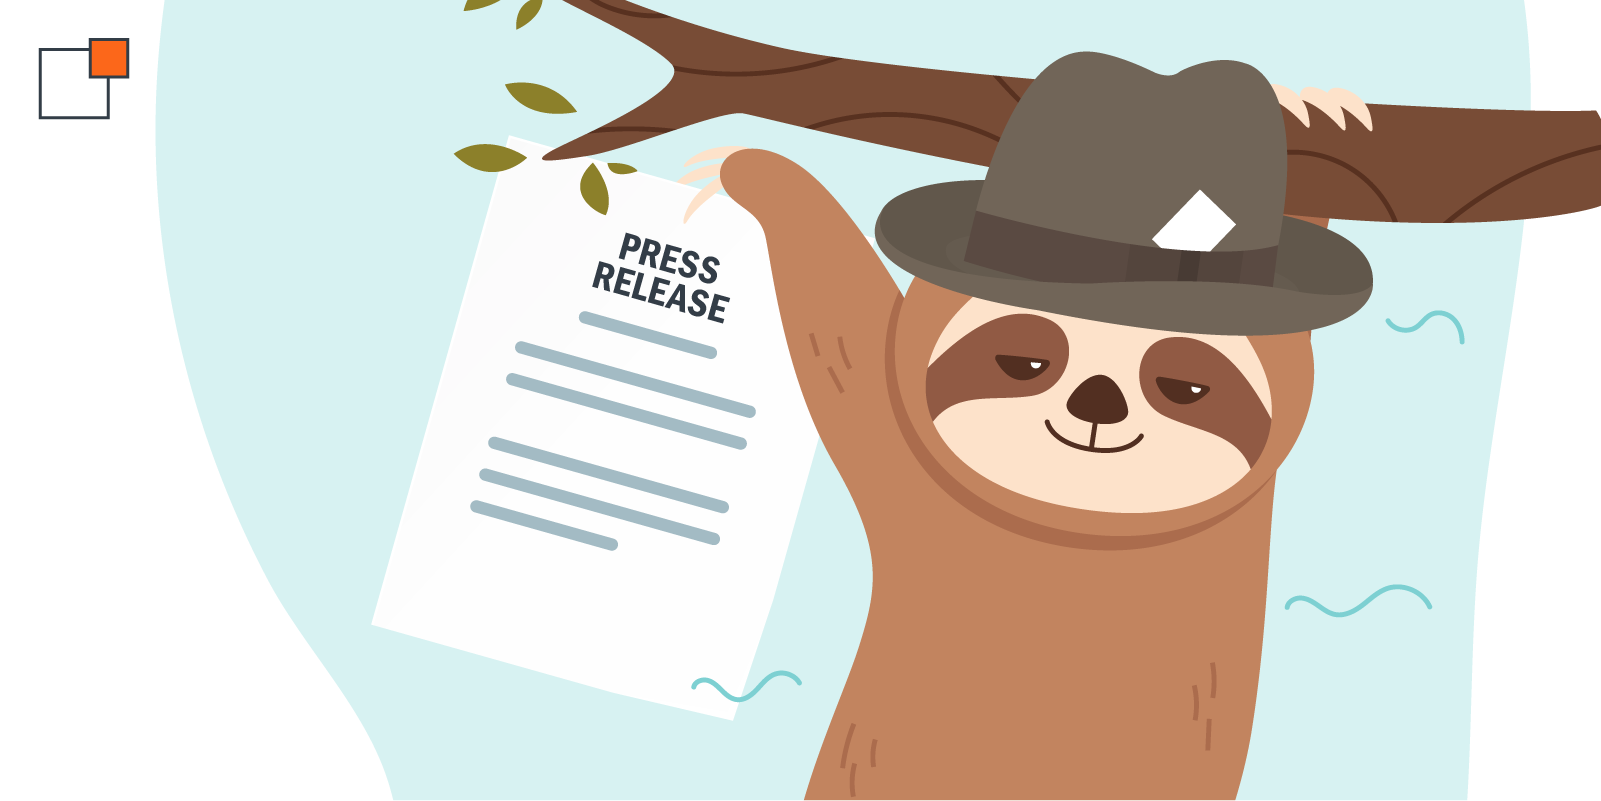 Sloth wearing a reporter's hat holding a press release